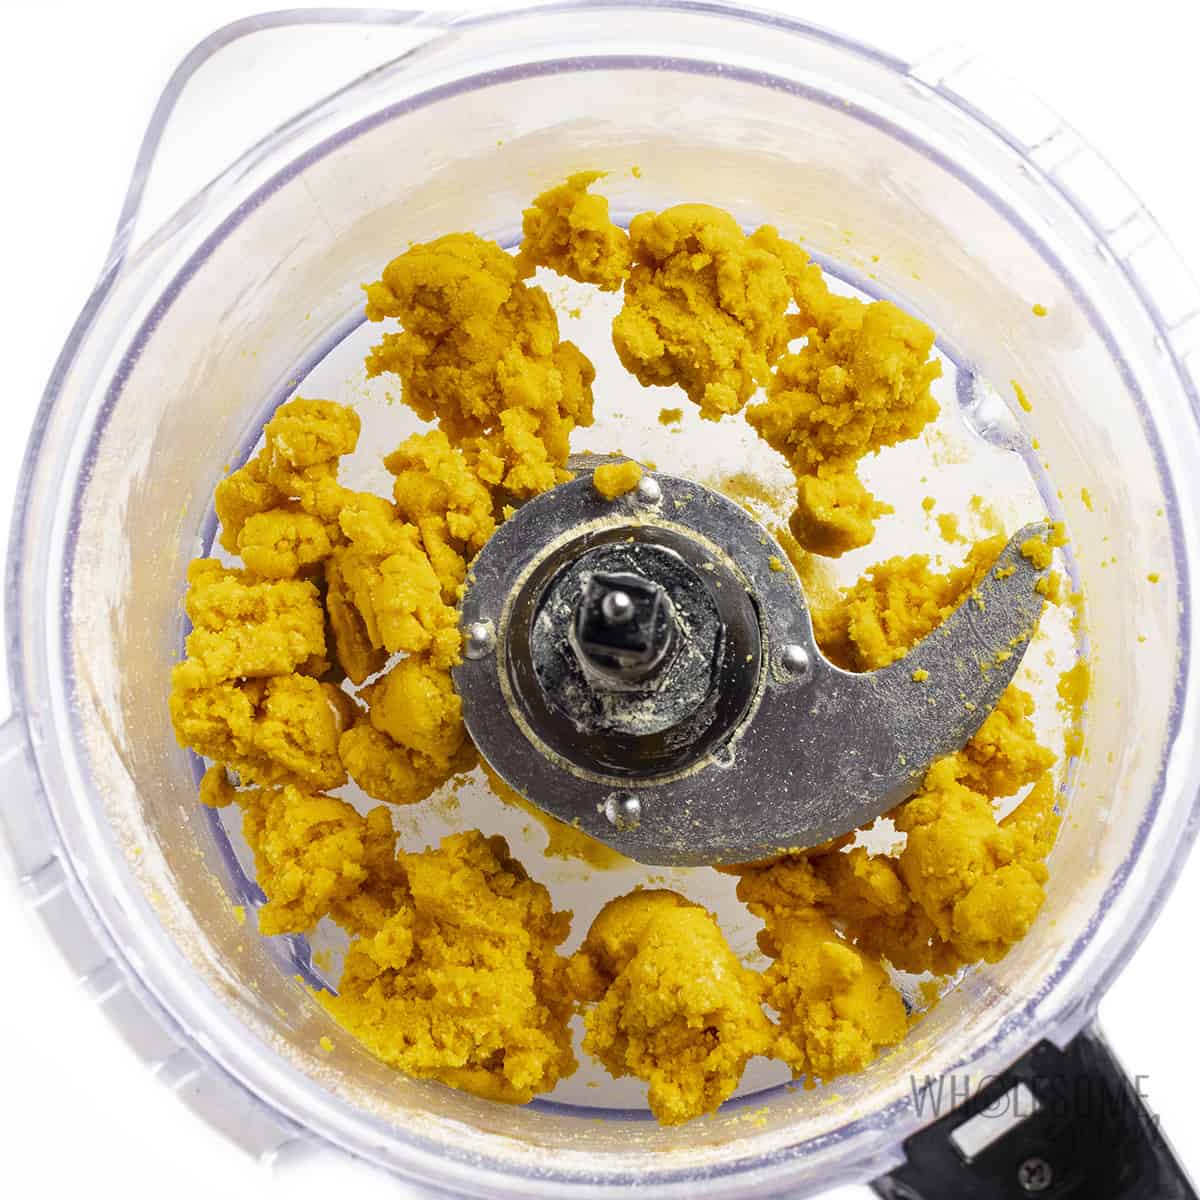 Lupin flour and egg yolk mixed in food processor